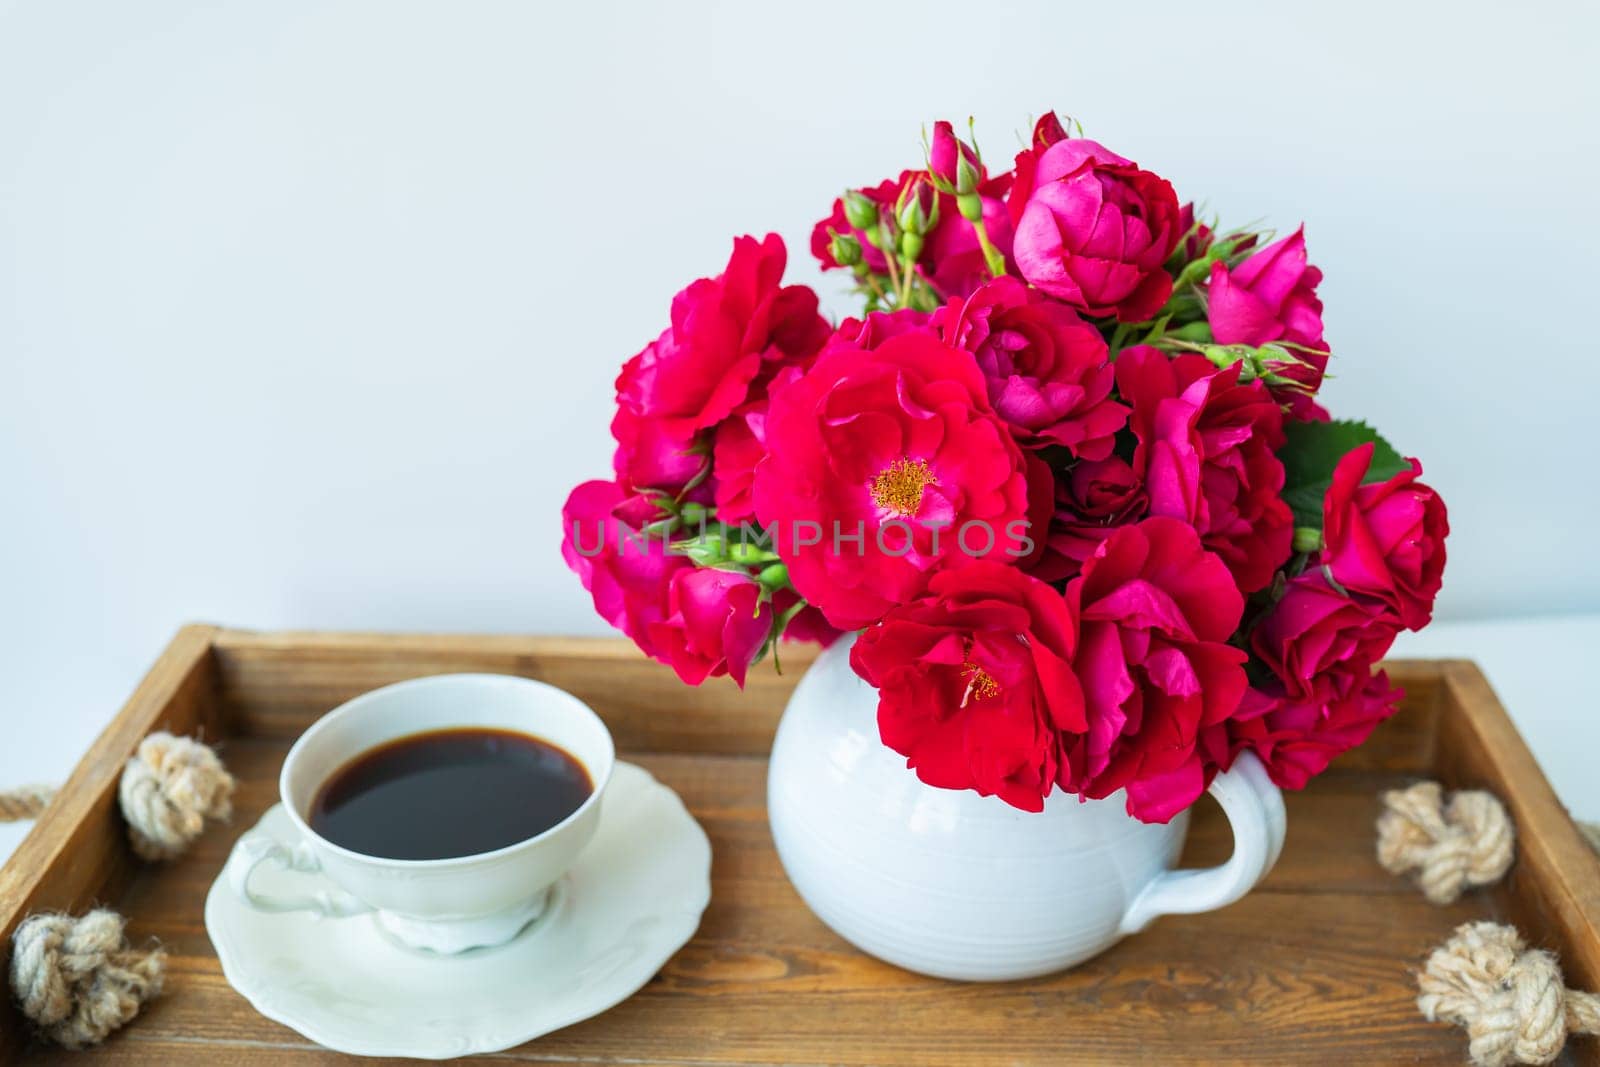 Still life with a cup of coffee on a wooden tray and a vase with freshly cut homemade roses. Romantic breakfast. Eating and drinking in the morning sunlight